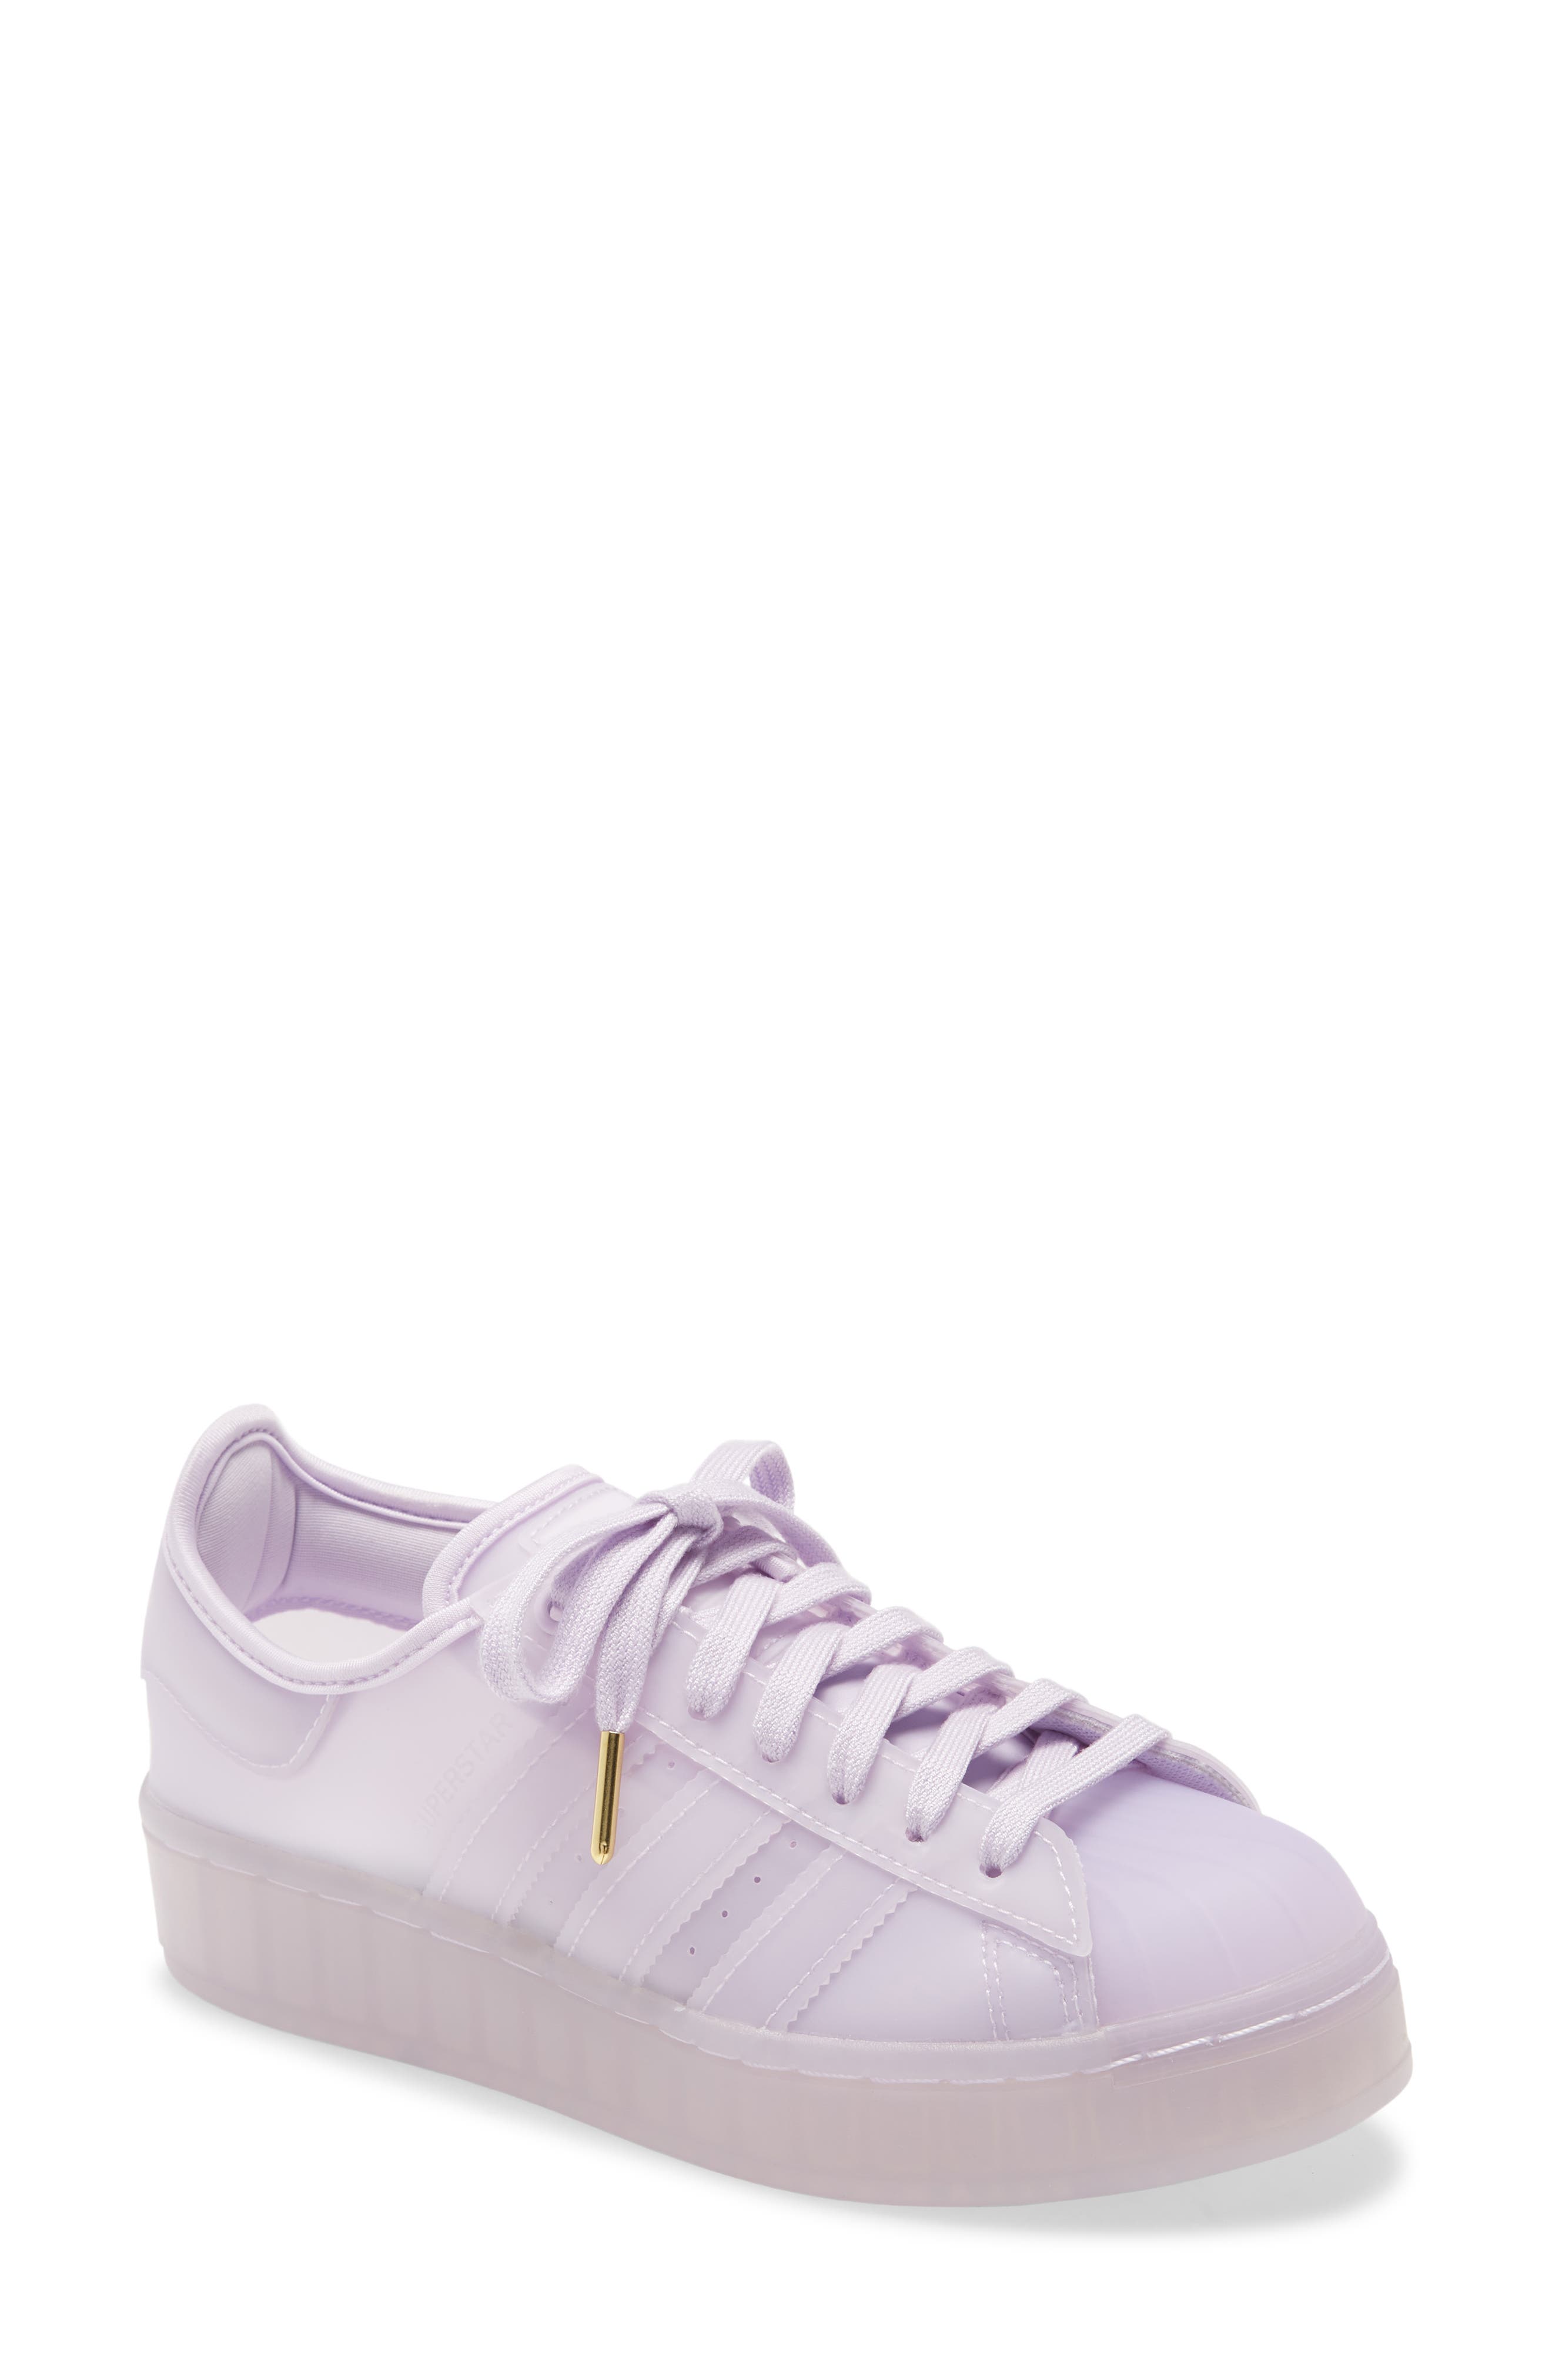 pink and purple adidas shoes